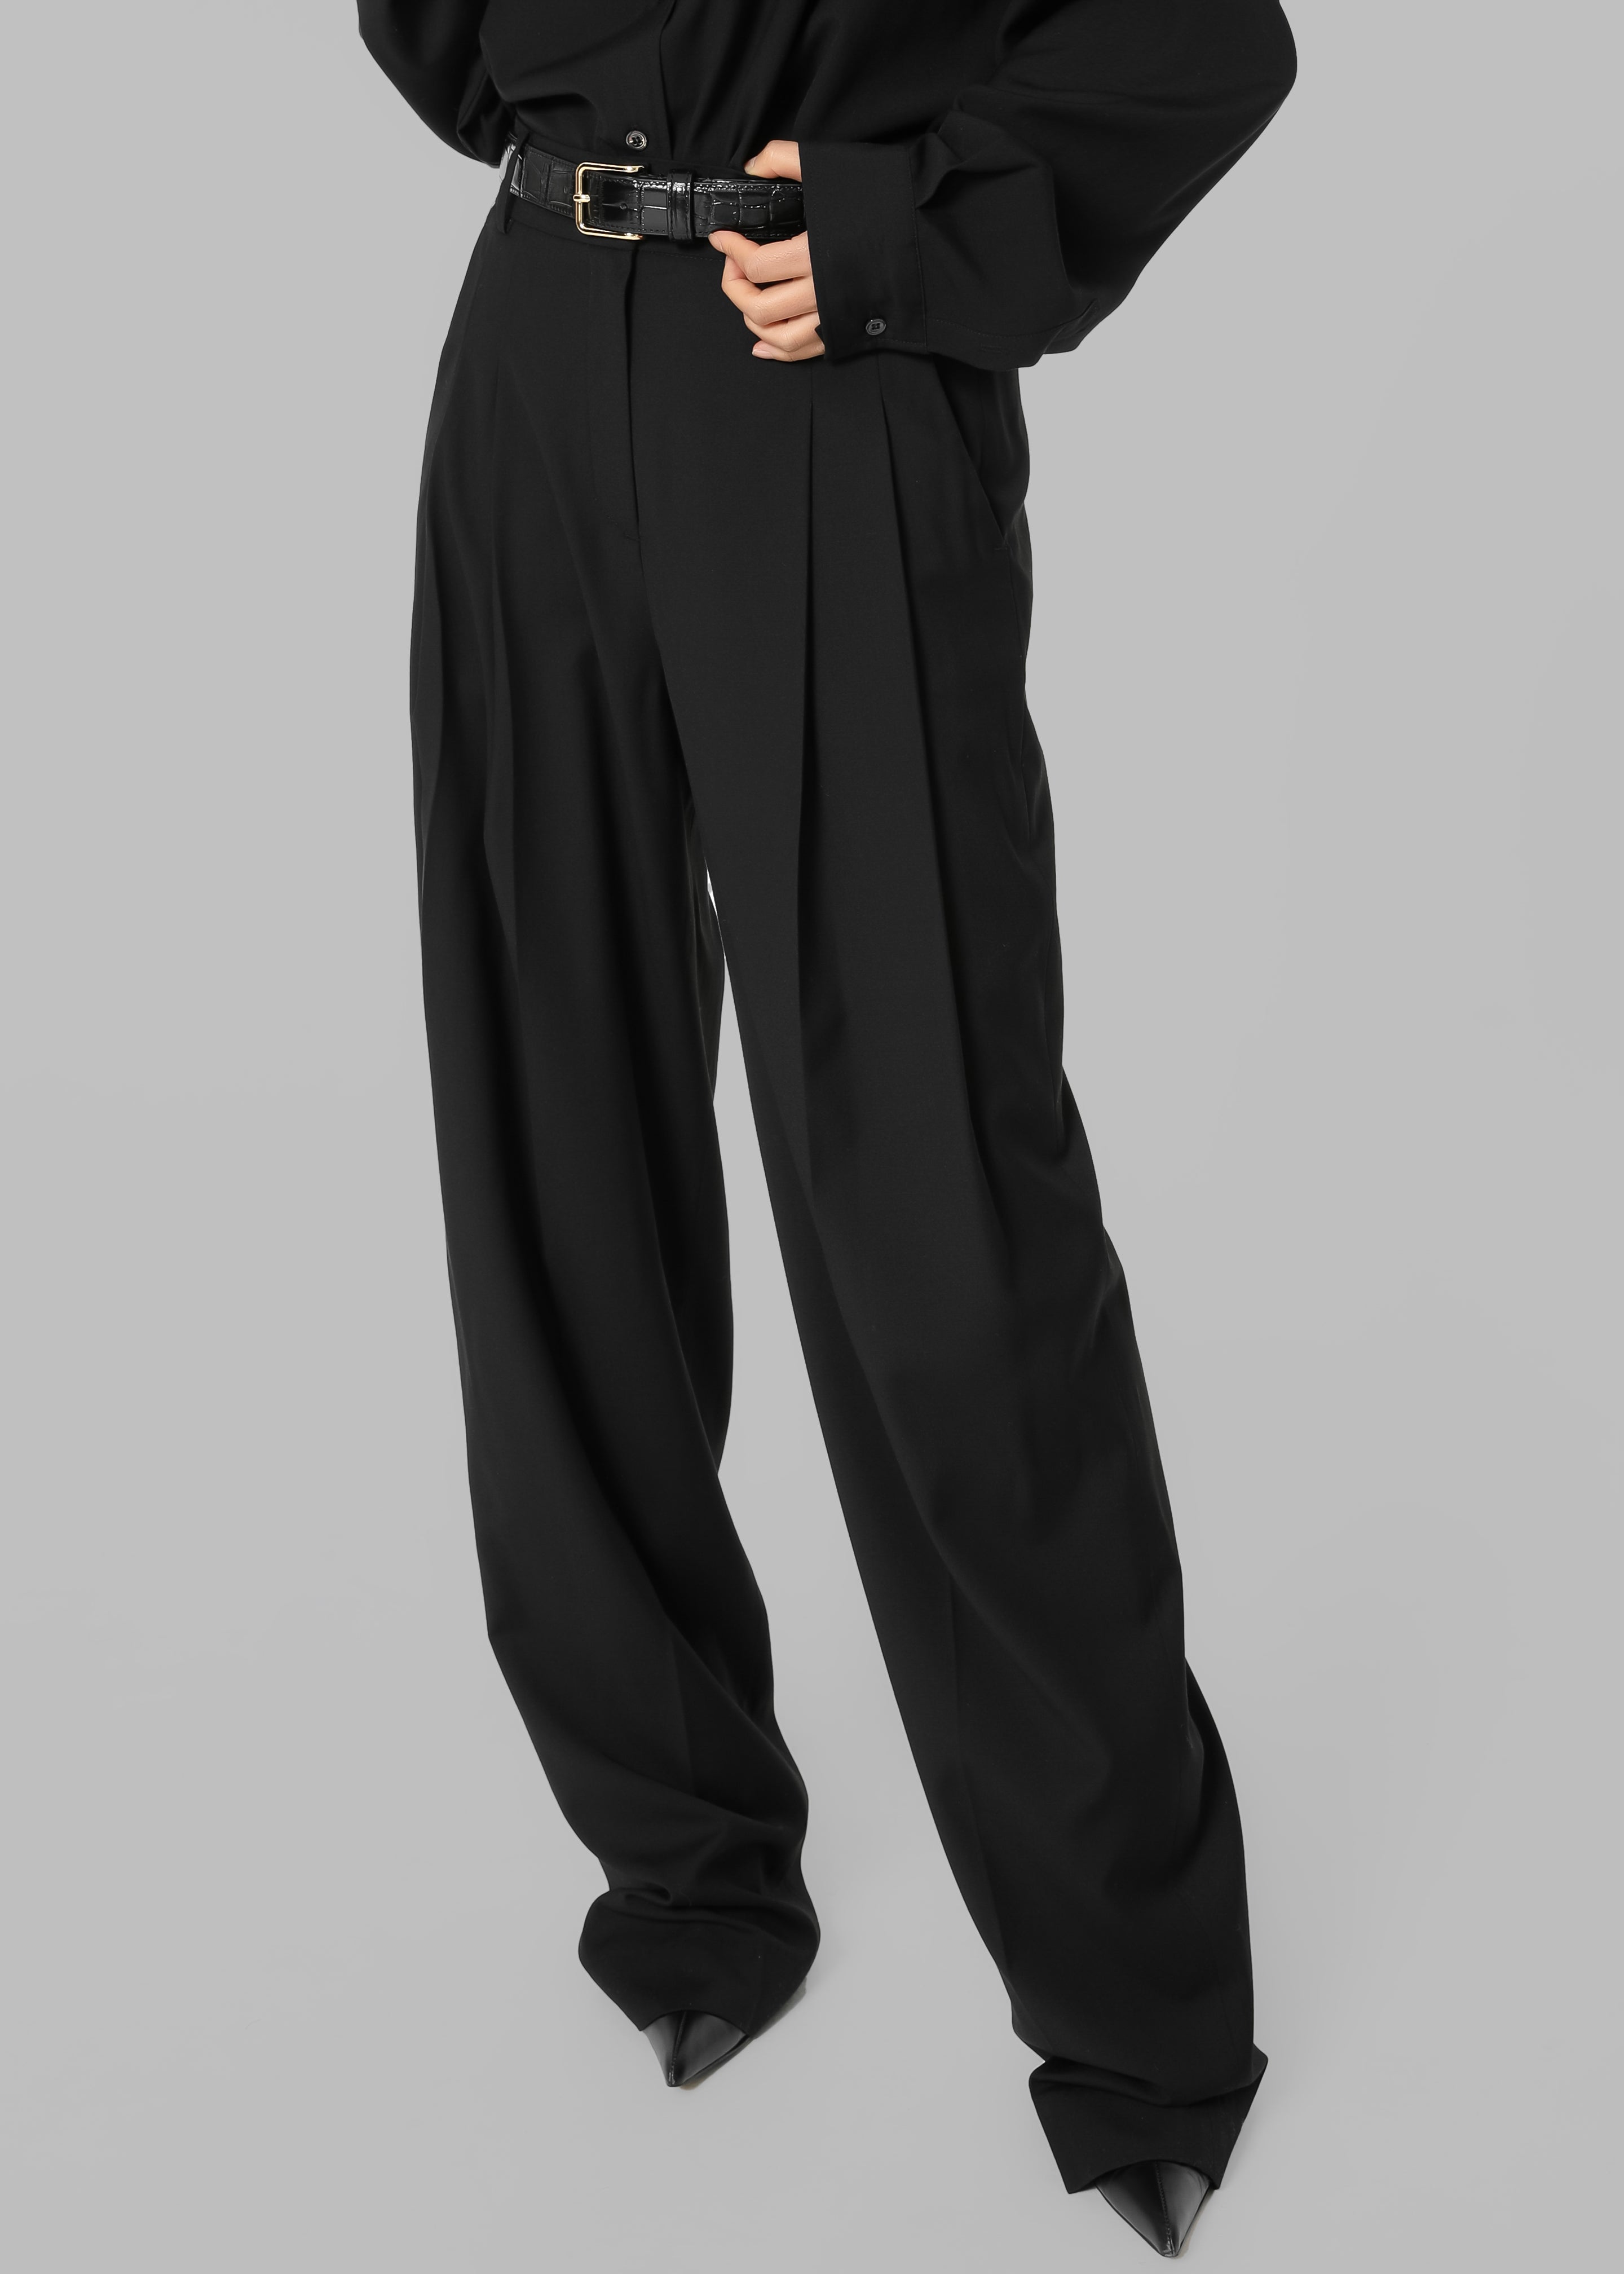 Gelso Pleated Trousers - Black - 3